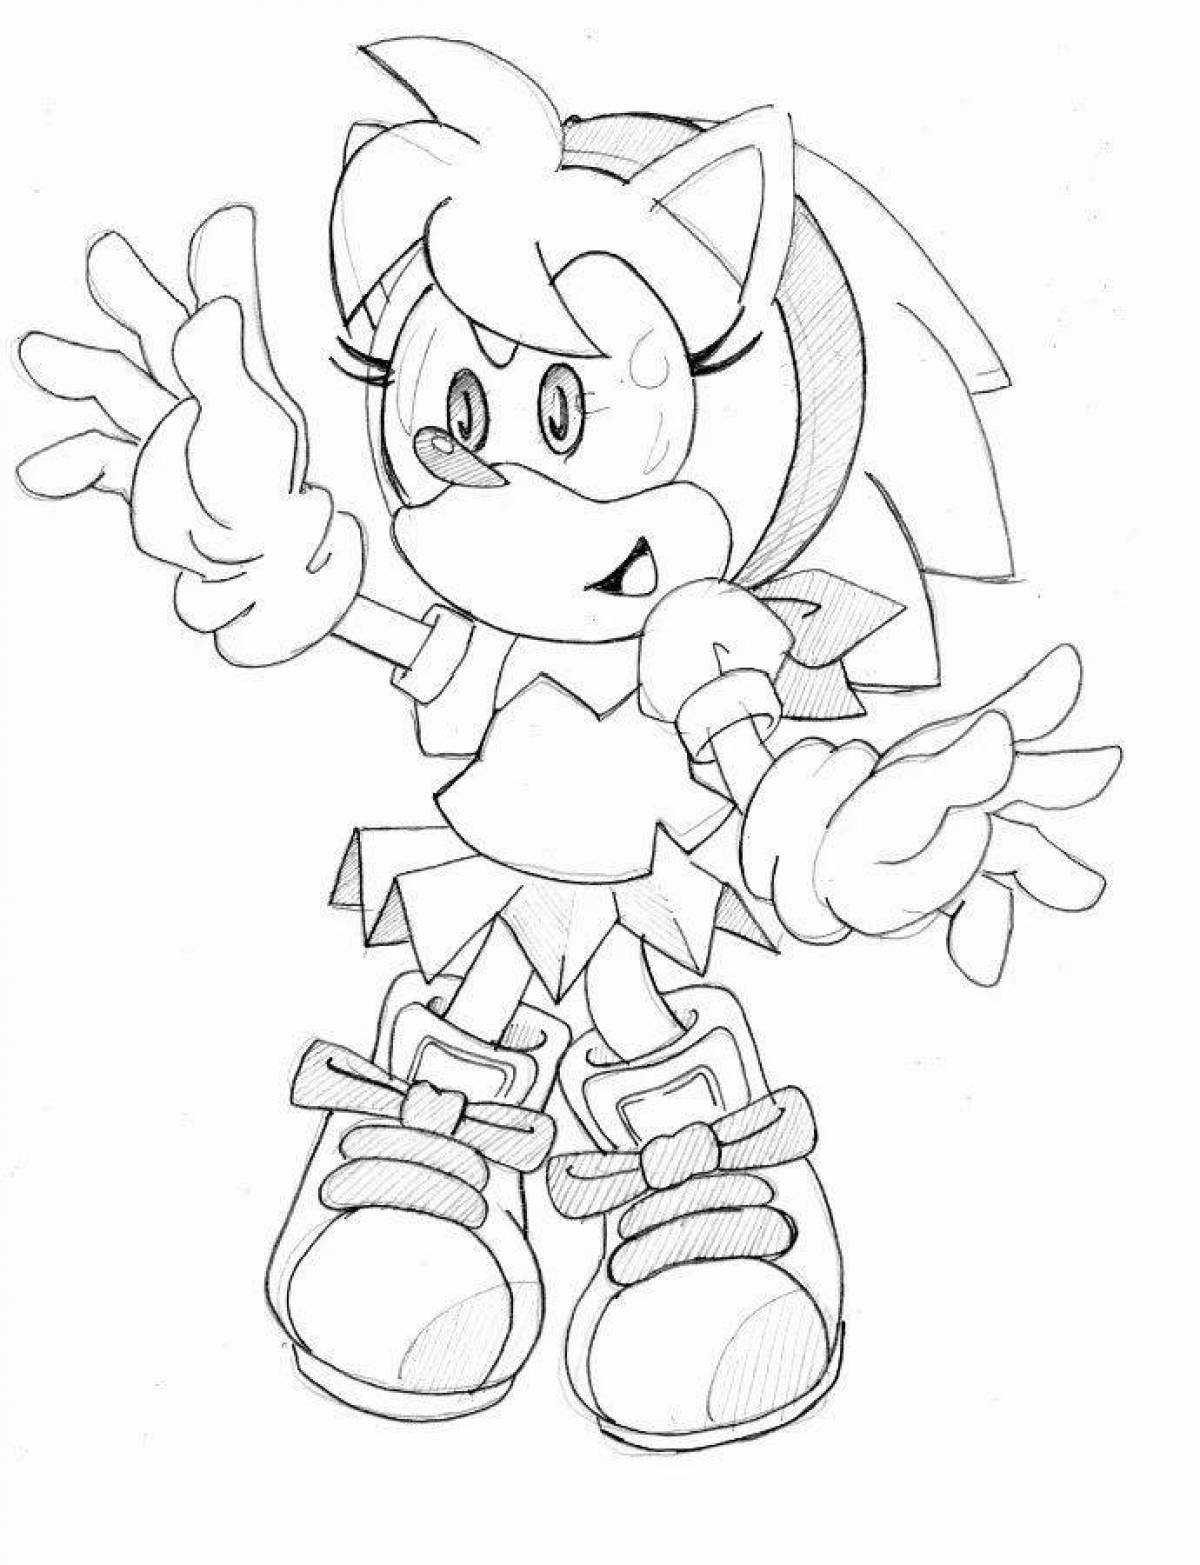 Charming amy coloring page